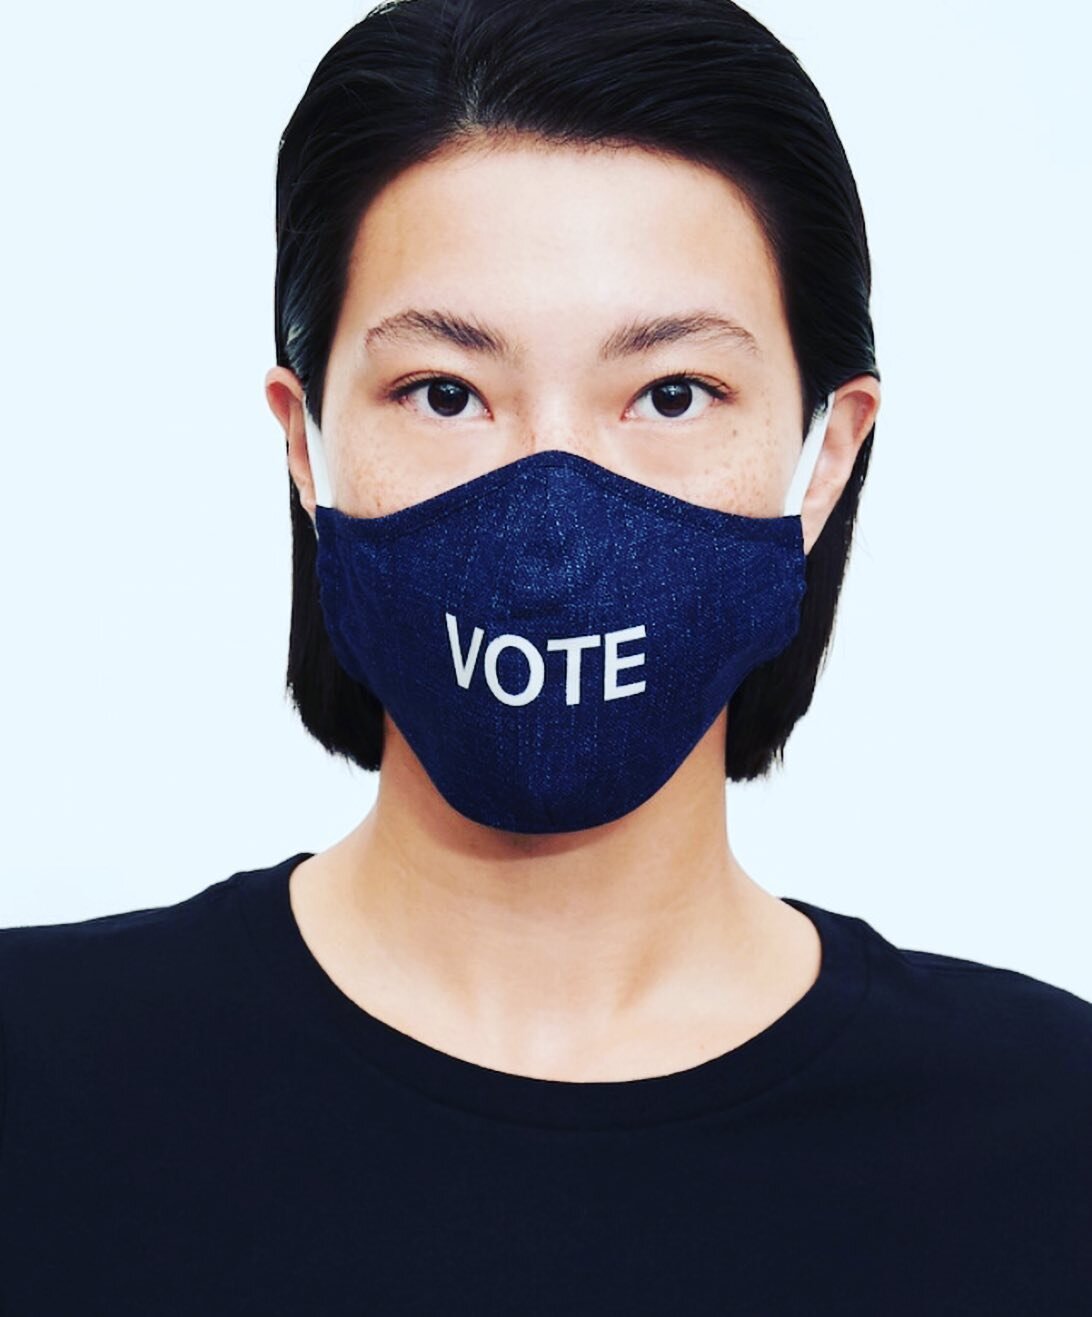 R U Registered to VOTE? New Vote #facemask 😷 now in stock online 👉🏻 link in bio @zactableleg 
#voted #facemask #vote #election #voter #ivoted #votes #votevotevote #voting #govote #elections #votingmatters #votenow #electionday #politics #democracy